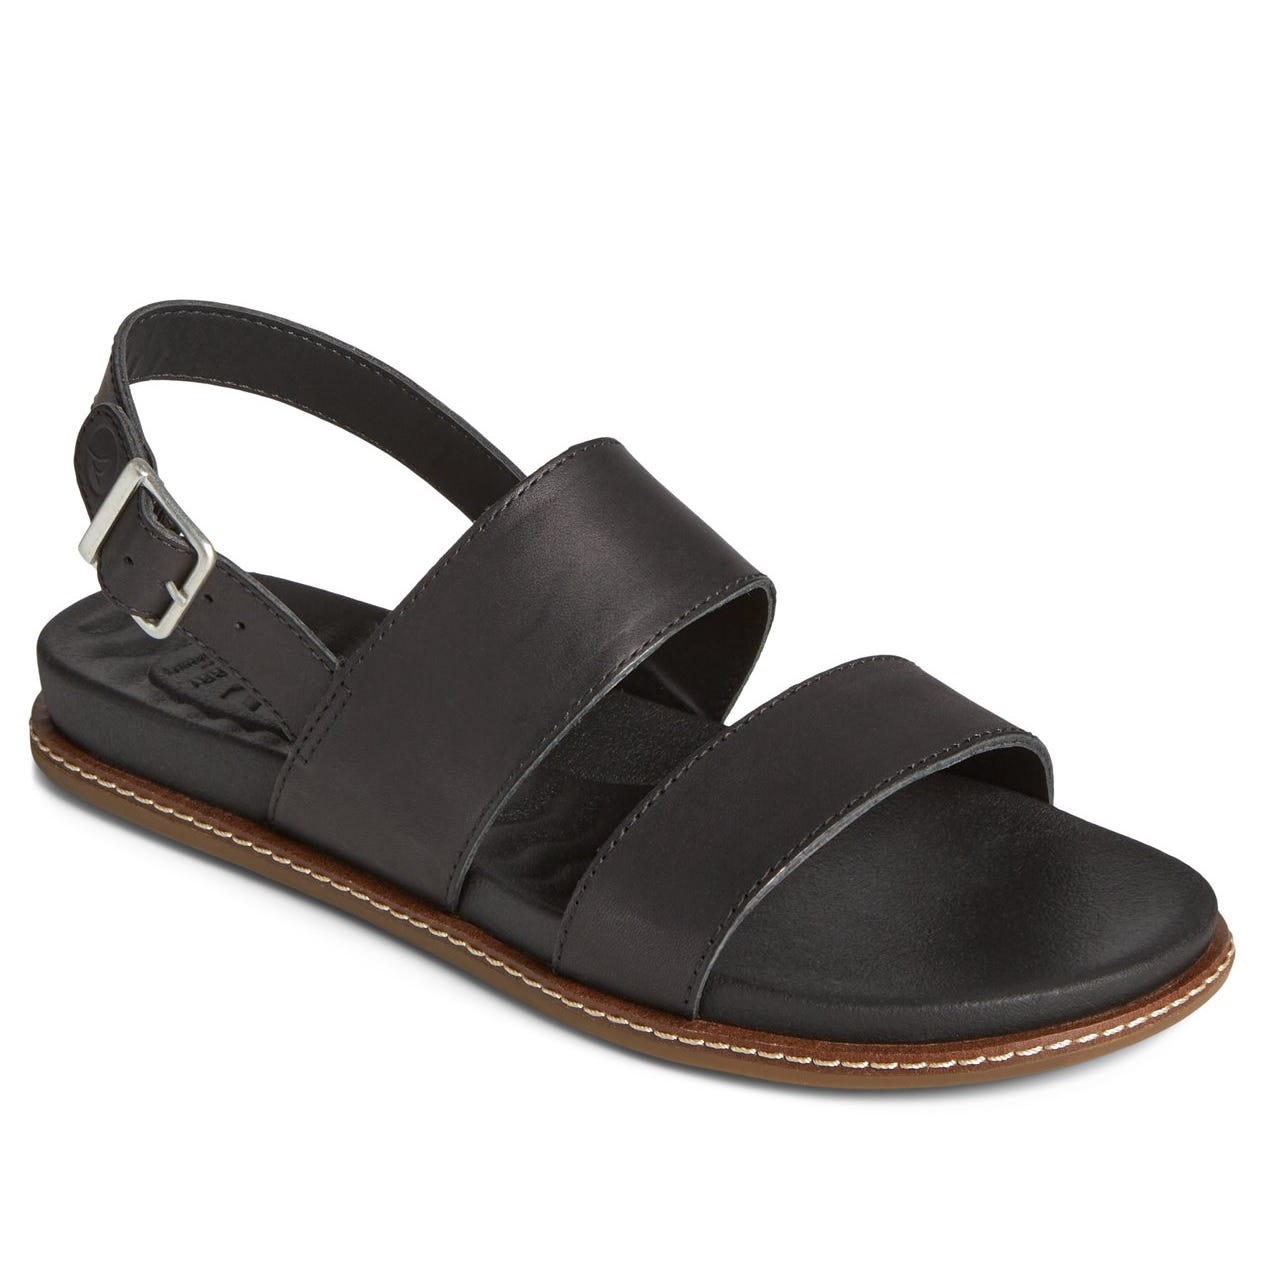 Black leather sandal with an adjustable buckle strap and wide front bands.